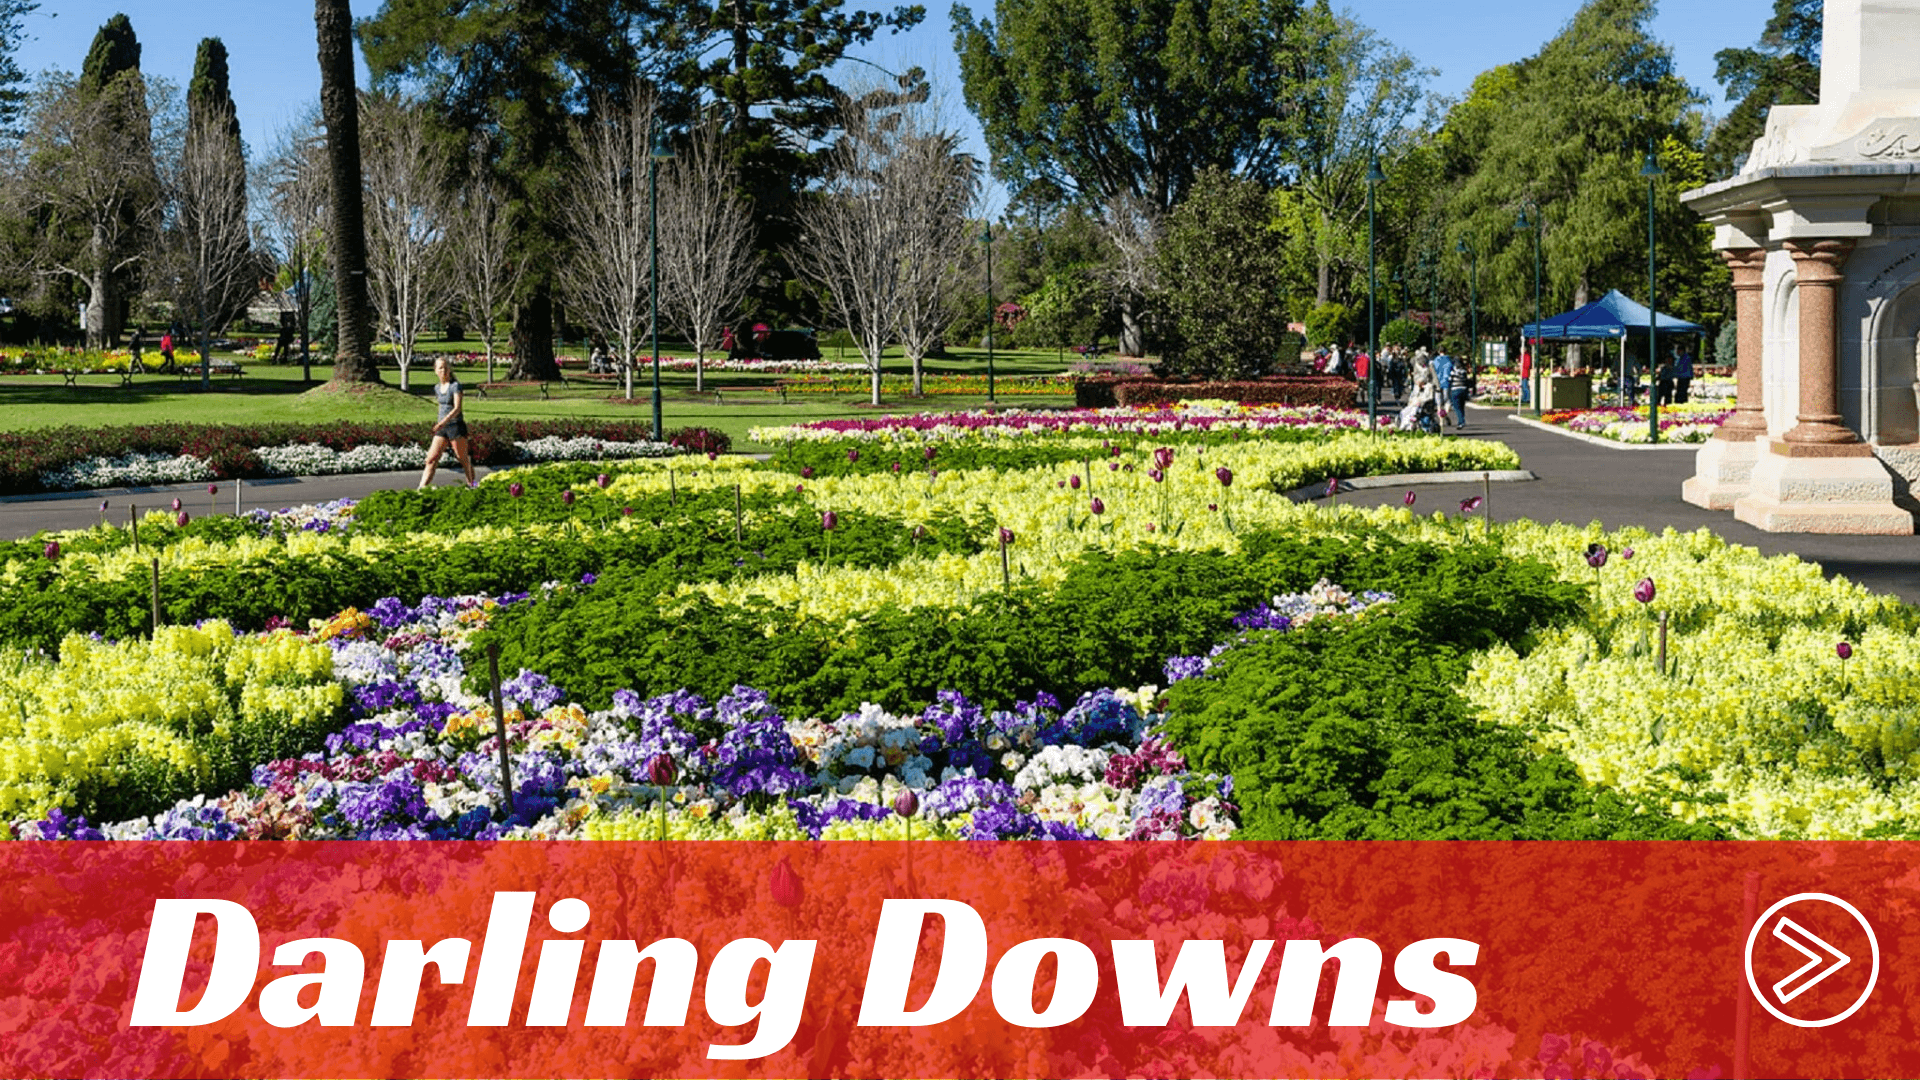 Darling Downs Travel Guide